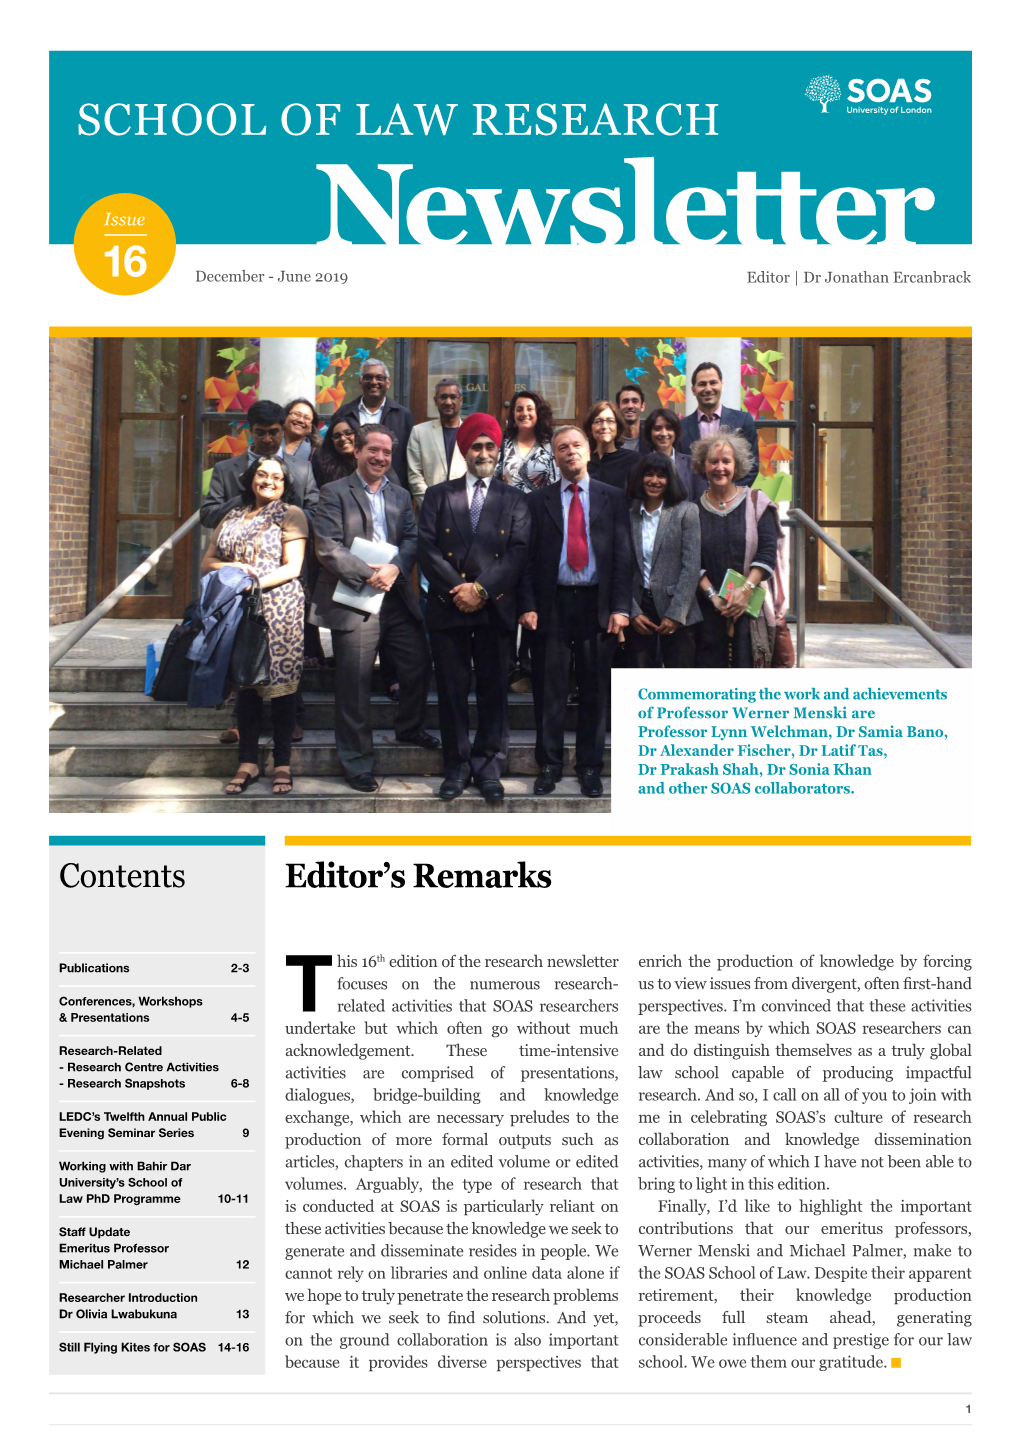 School of Law Research Newsletter Issue 16